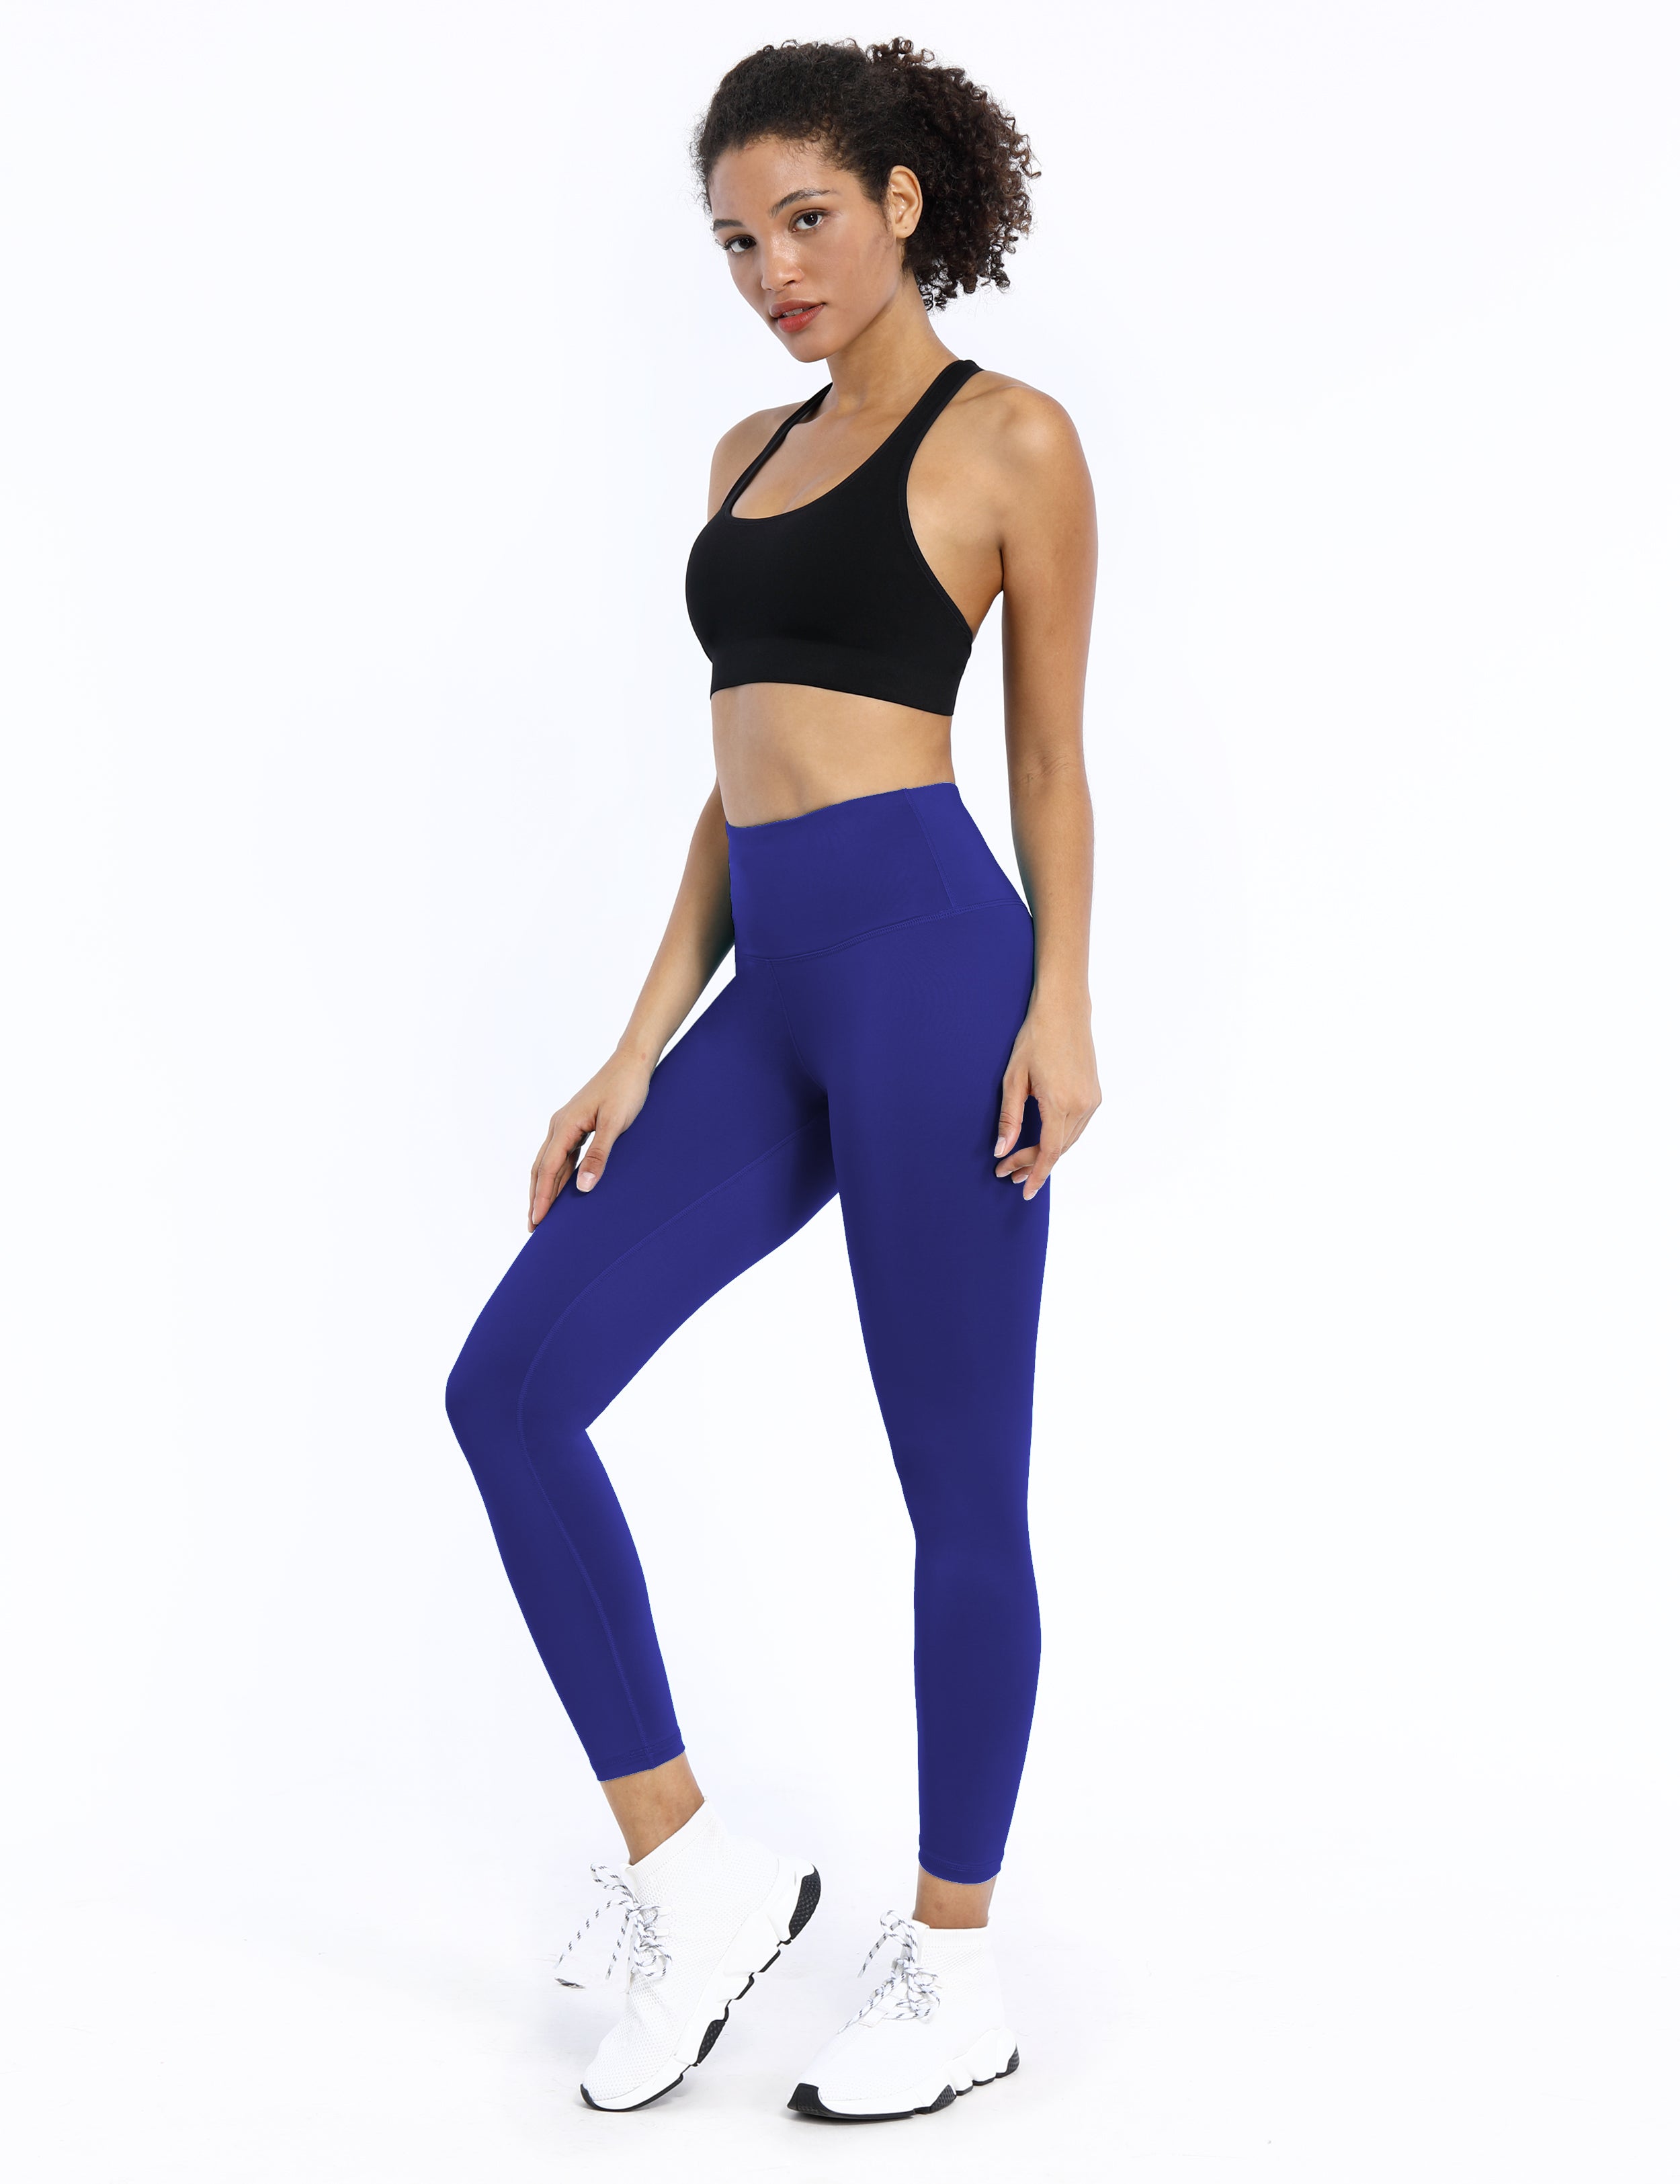 BUBBLELIME 2 Styles Petite/Tall Women's High Waist Yoga Leggings Over The  Heel Soft Tummy Control Extra Long Workout Pants